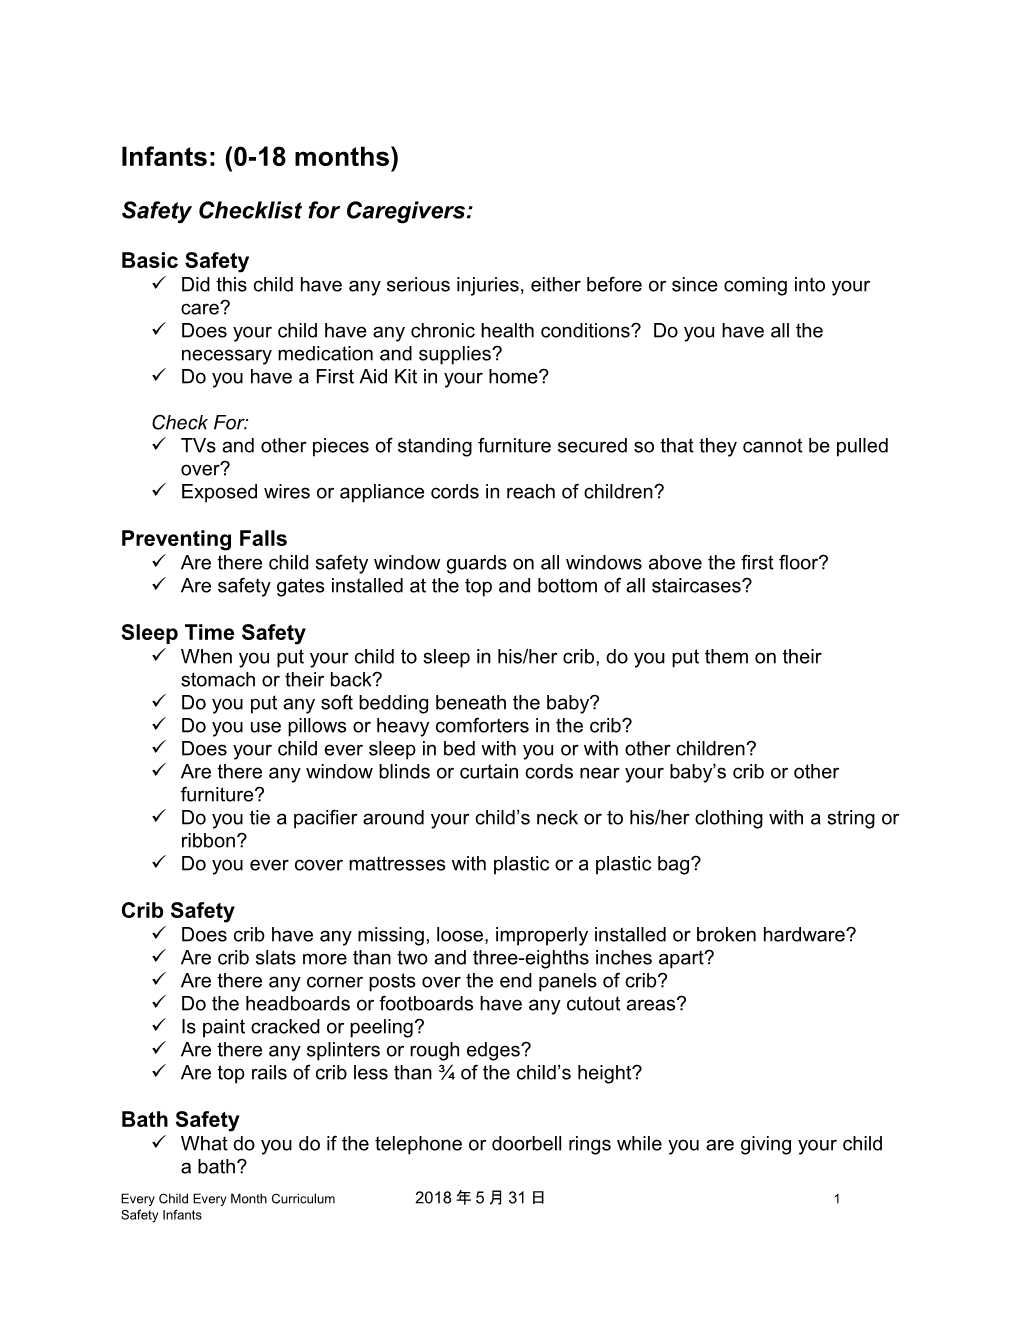 Safety Questions Checklist for Infants: Questions for Caregivers